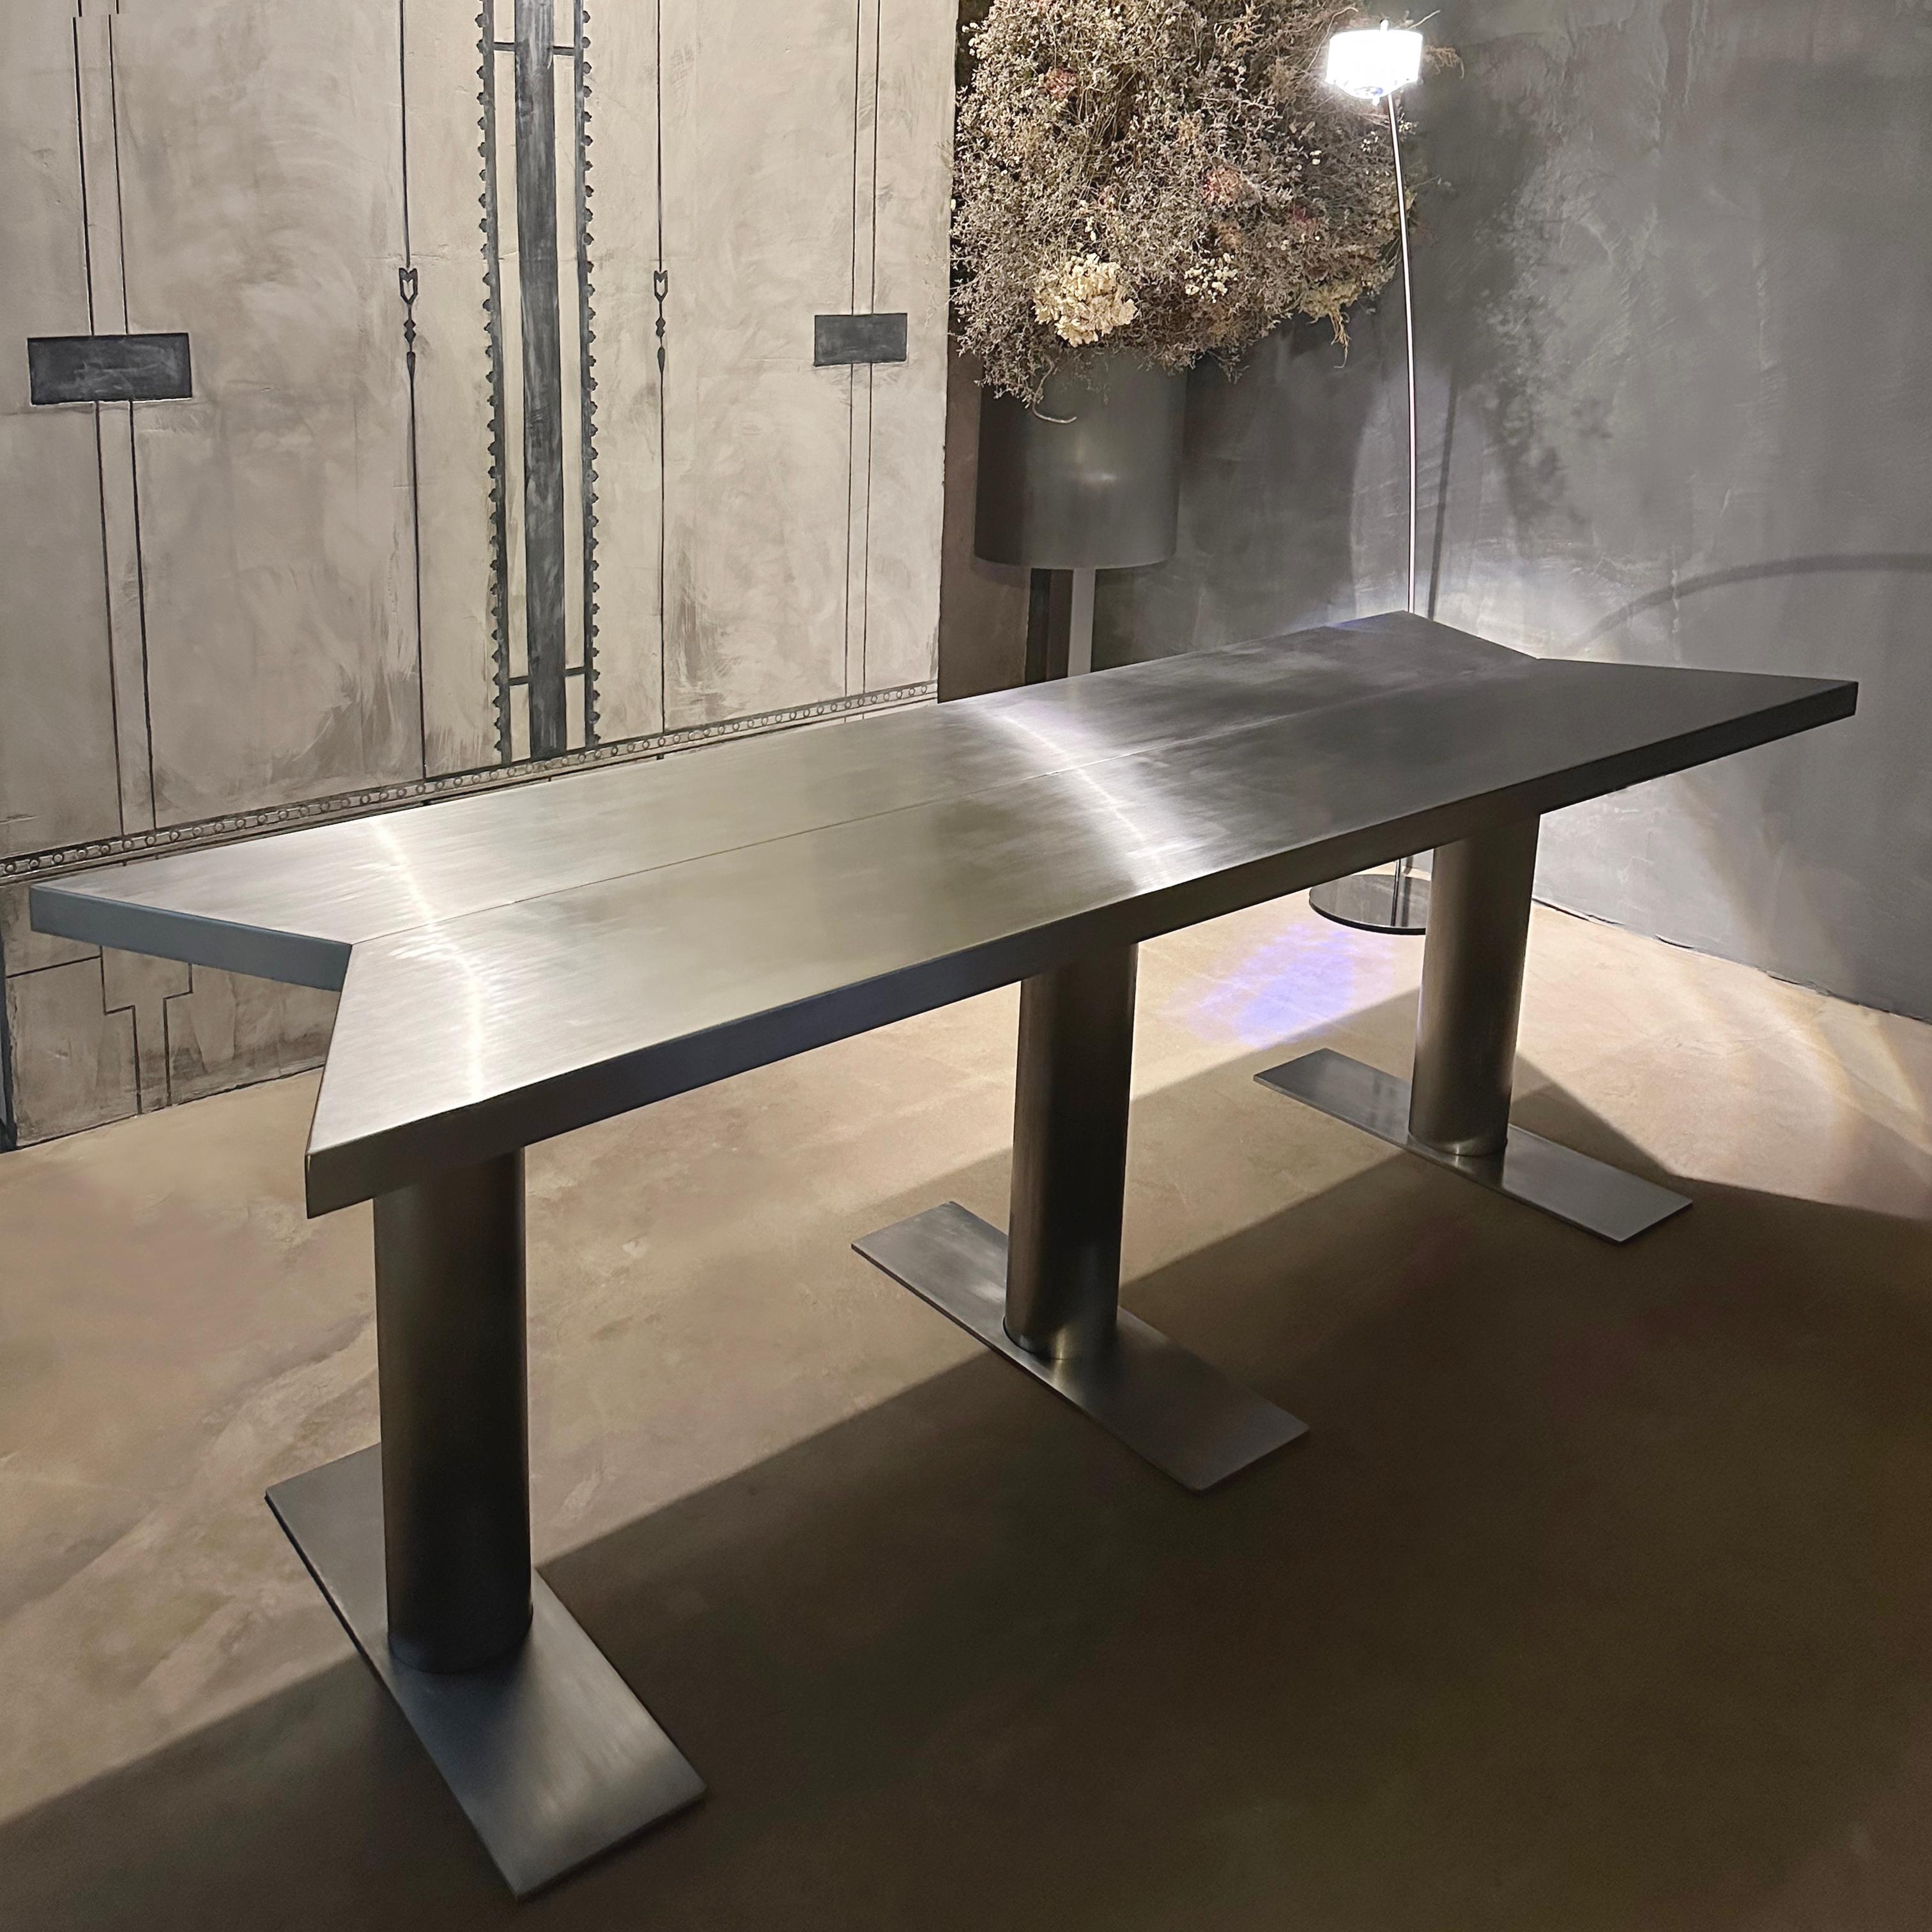 “Running Gun” Dining Table, Iron, JAMES VINCENT MILANO, Italy, 2023

Irregular hexagonal top. 
Tripod pedestal legs. 
Set completed with “Running Gun” Accent Tables.
Polished and brushed iron.
Handcrafted in Cantù, Italy.

Height: 77 cm